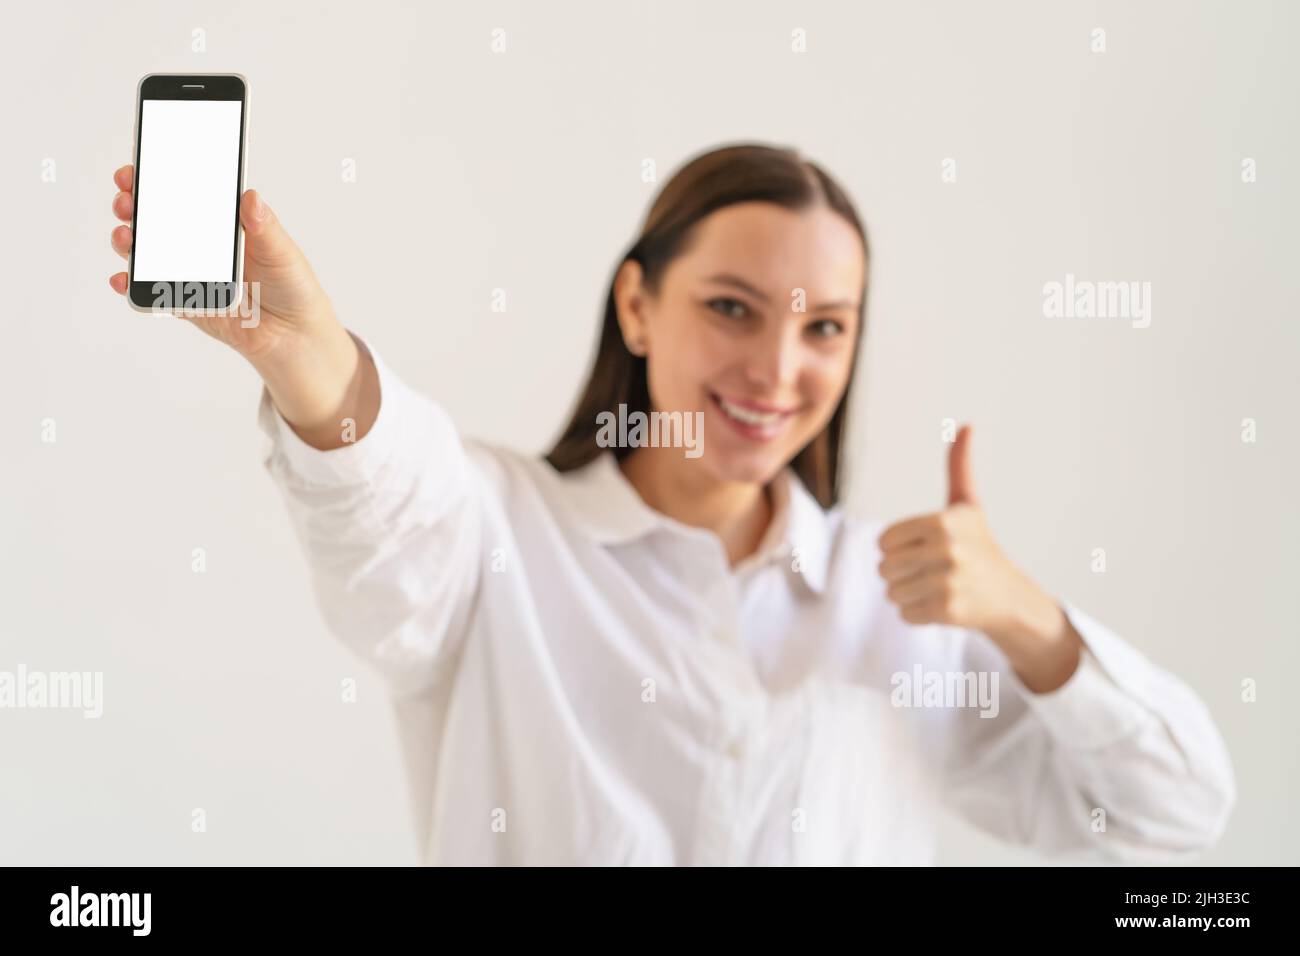 Young brunette woman showing smartphone screen, close up on hand with phone. Mockup image with copy space on display for design. Stock Photo